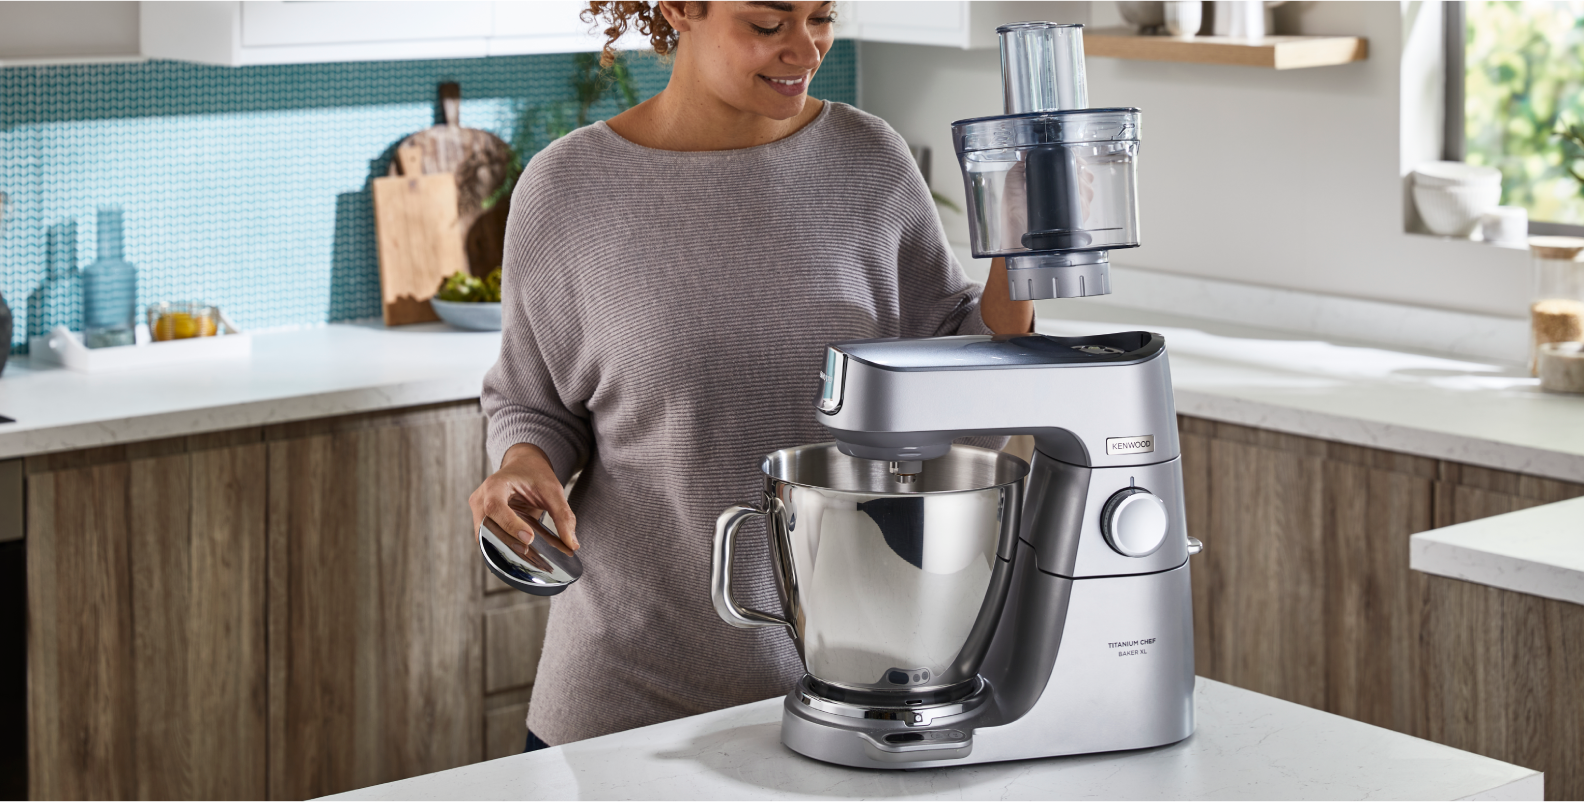 5 attachments to use with your Kenwood stand mixer | Kenwood UK